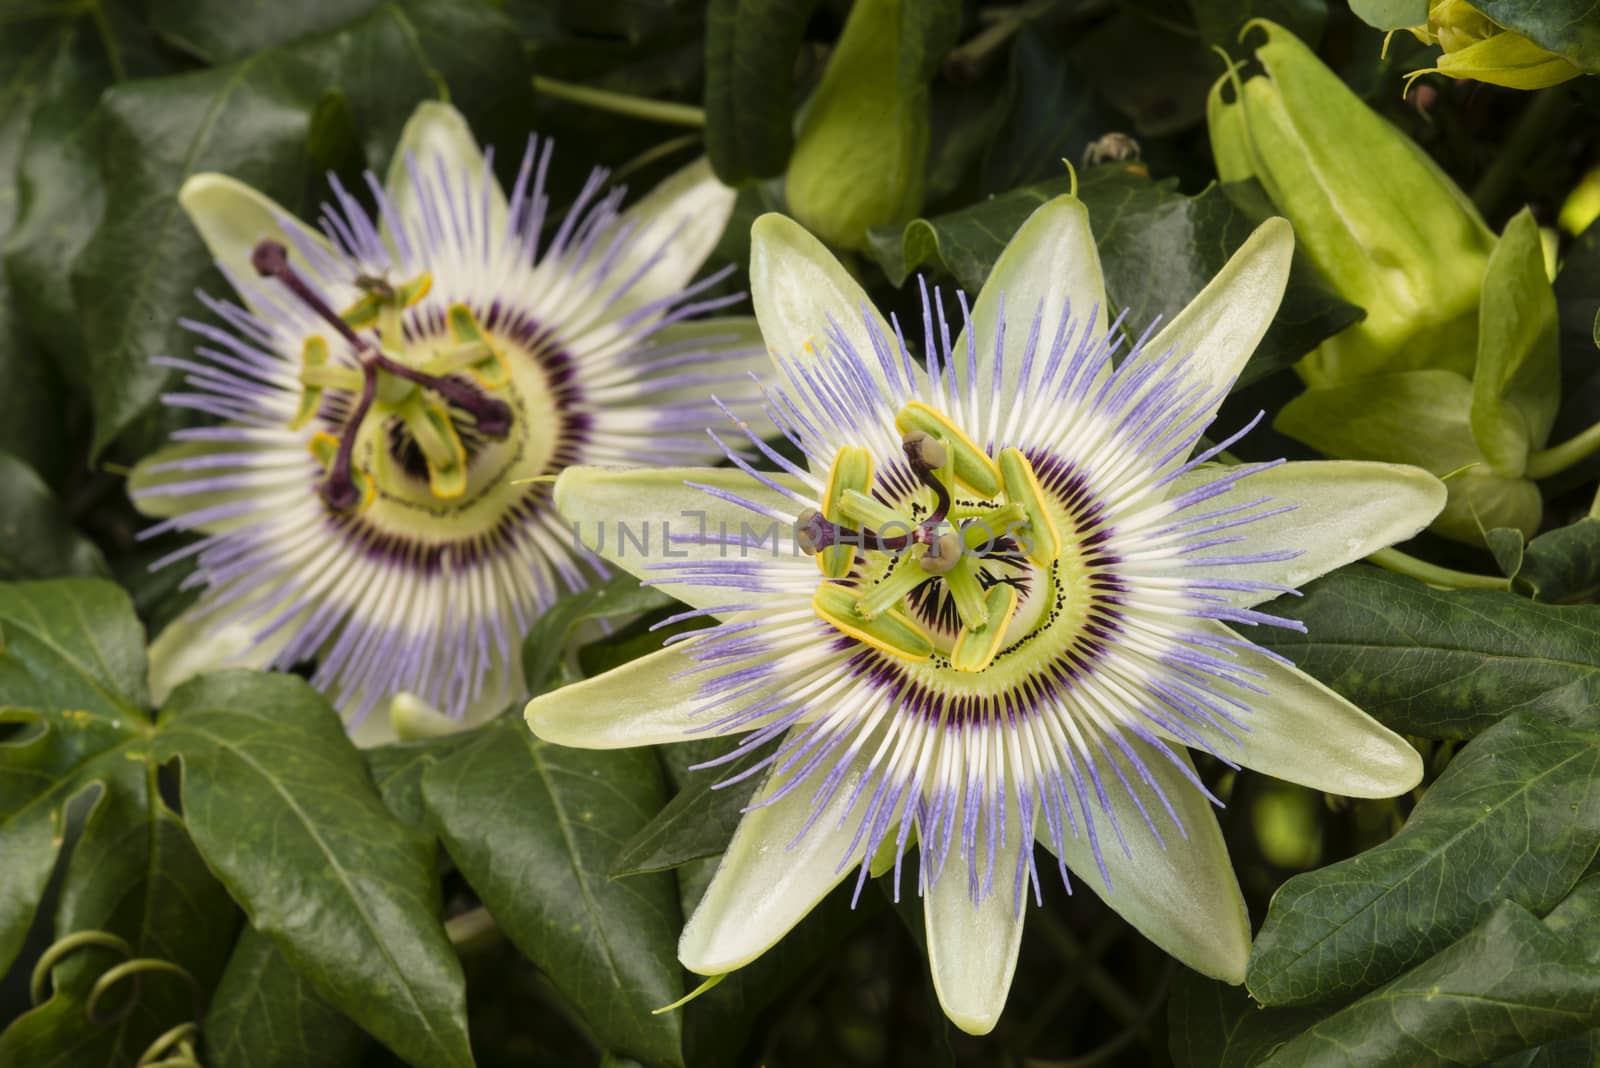 Two Purple passion flower in full bloom, Passiflora.